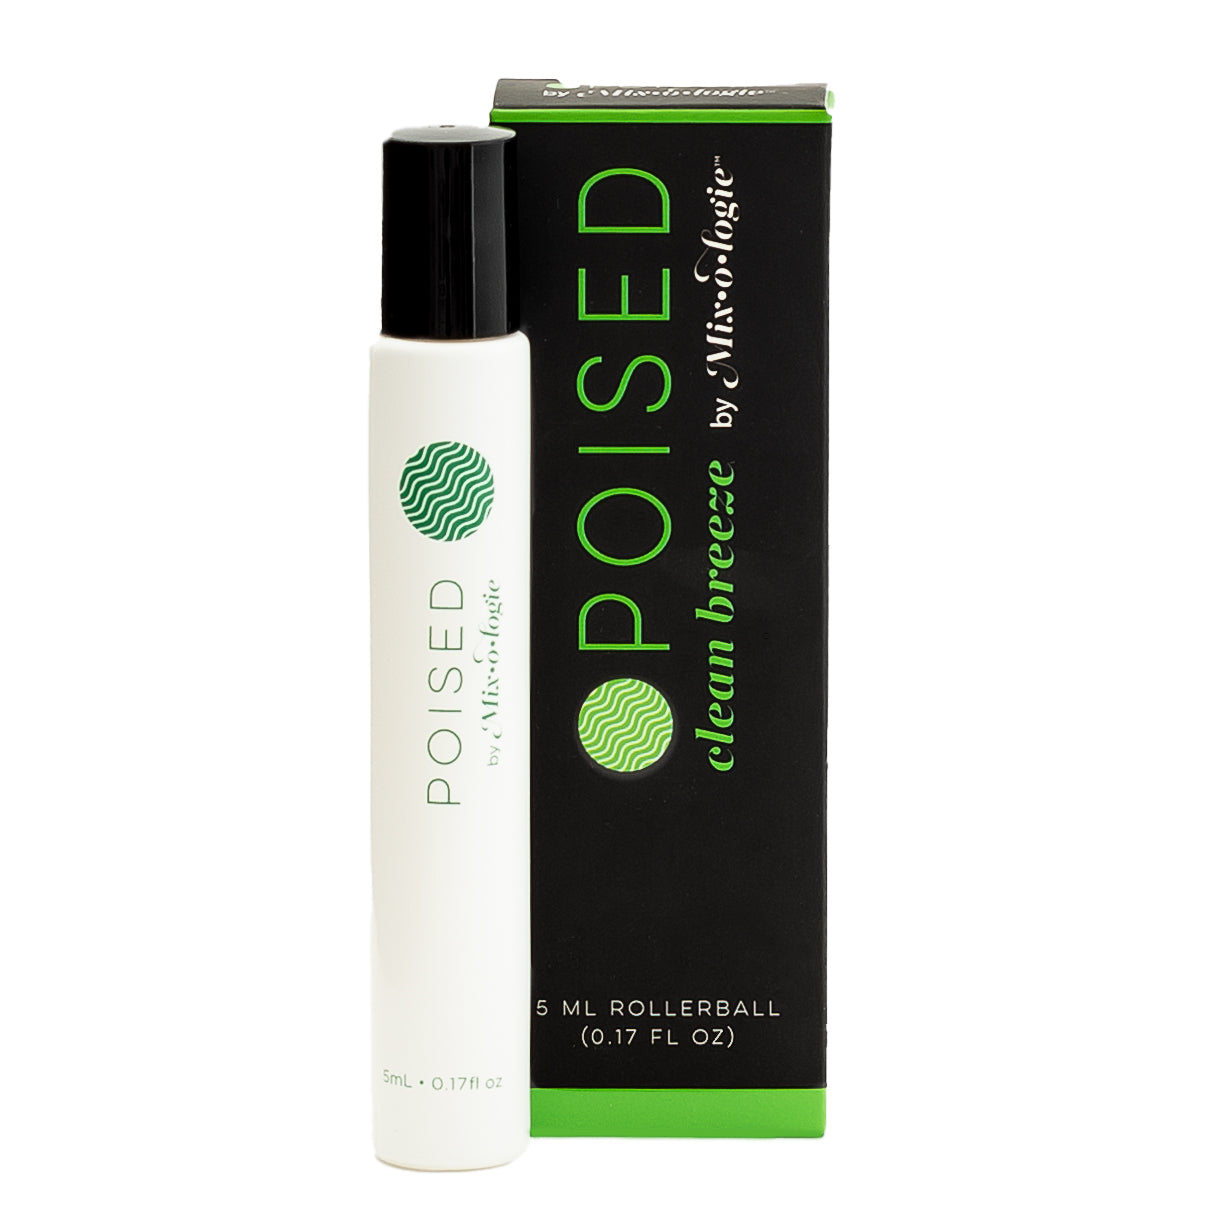 Poised (clean breeze) Rollerball